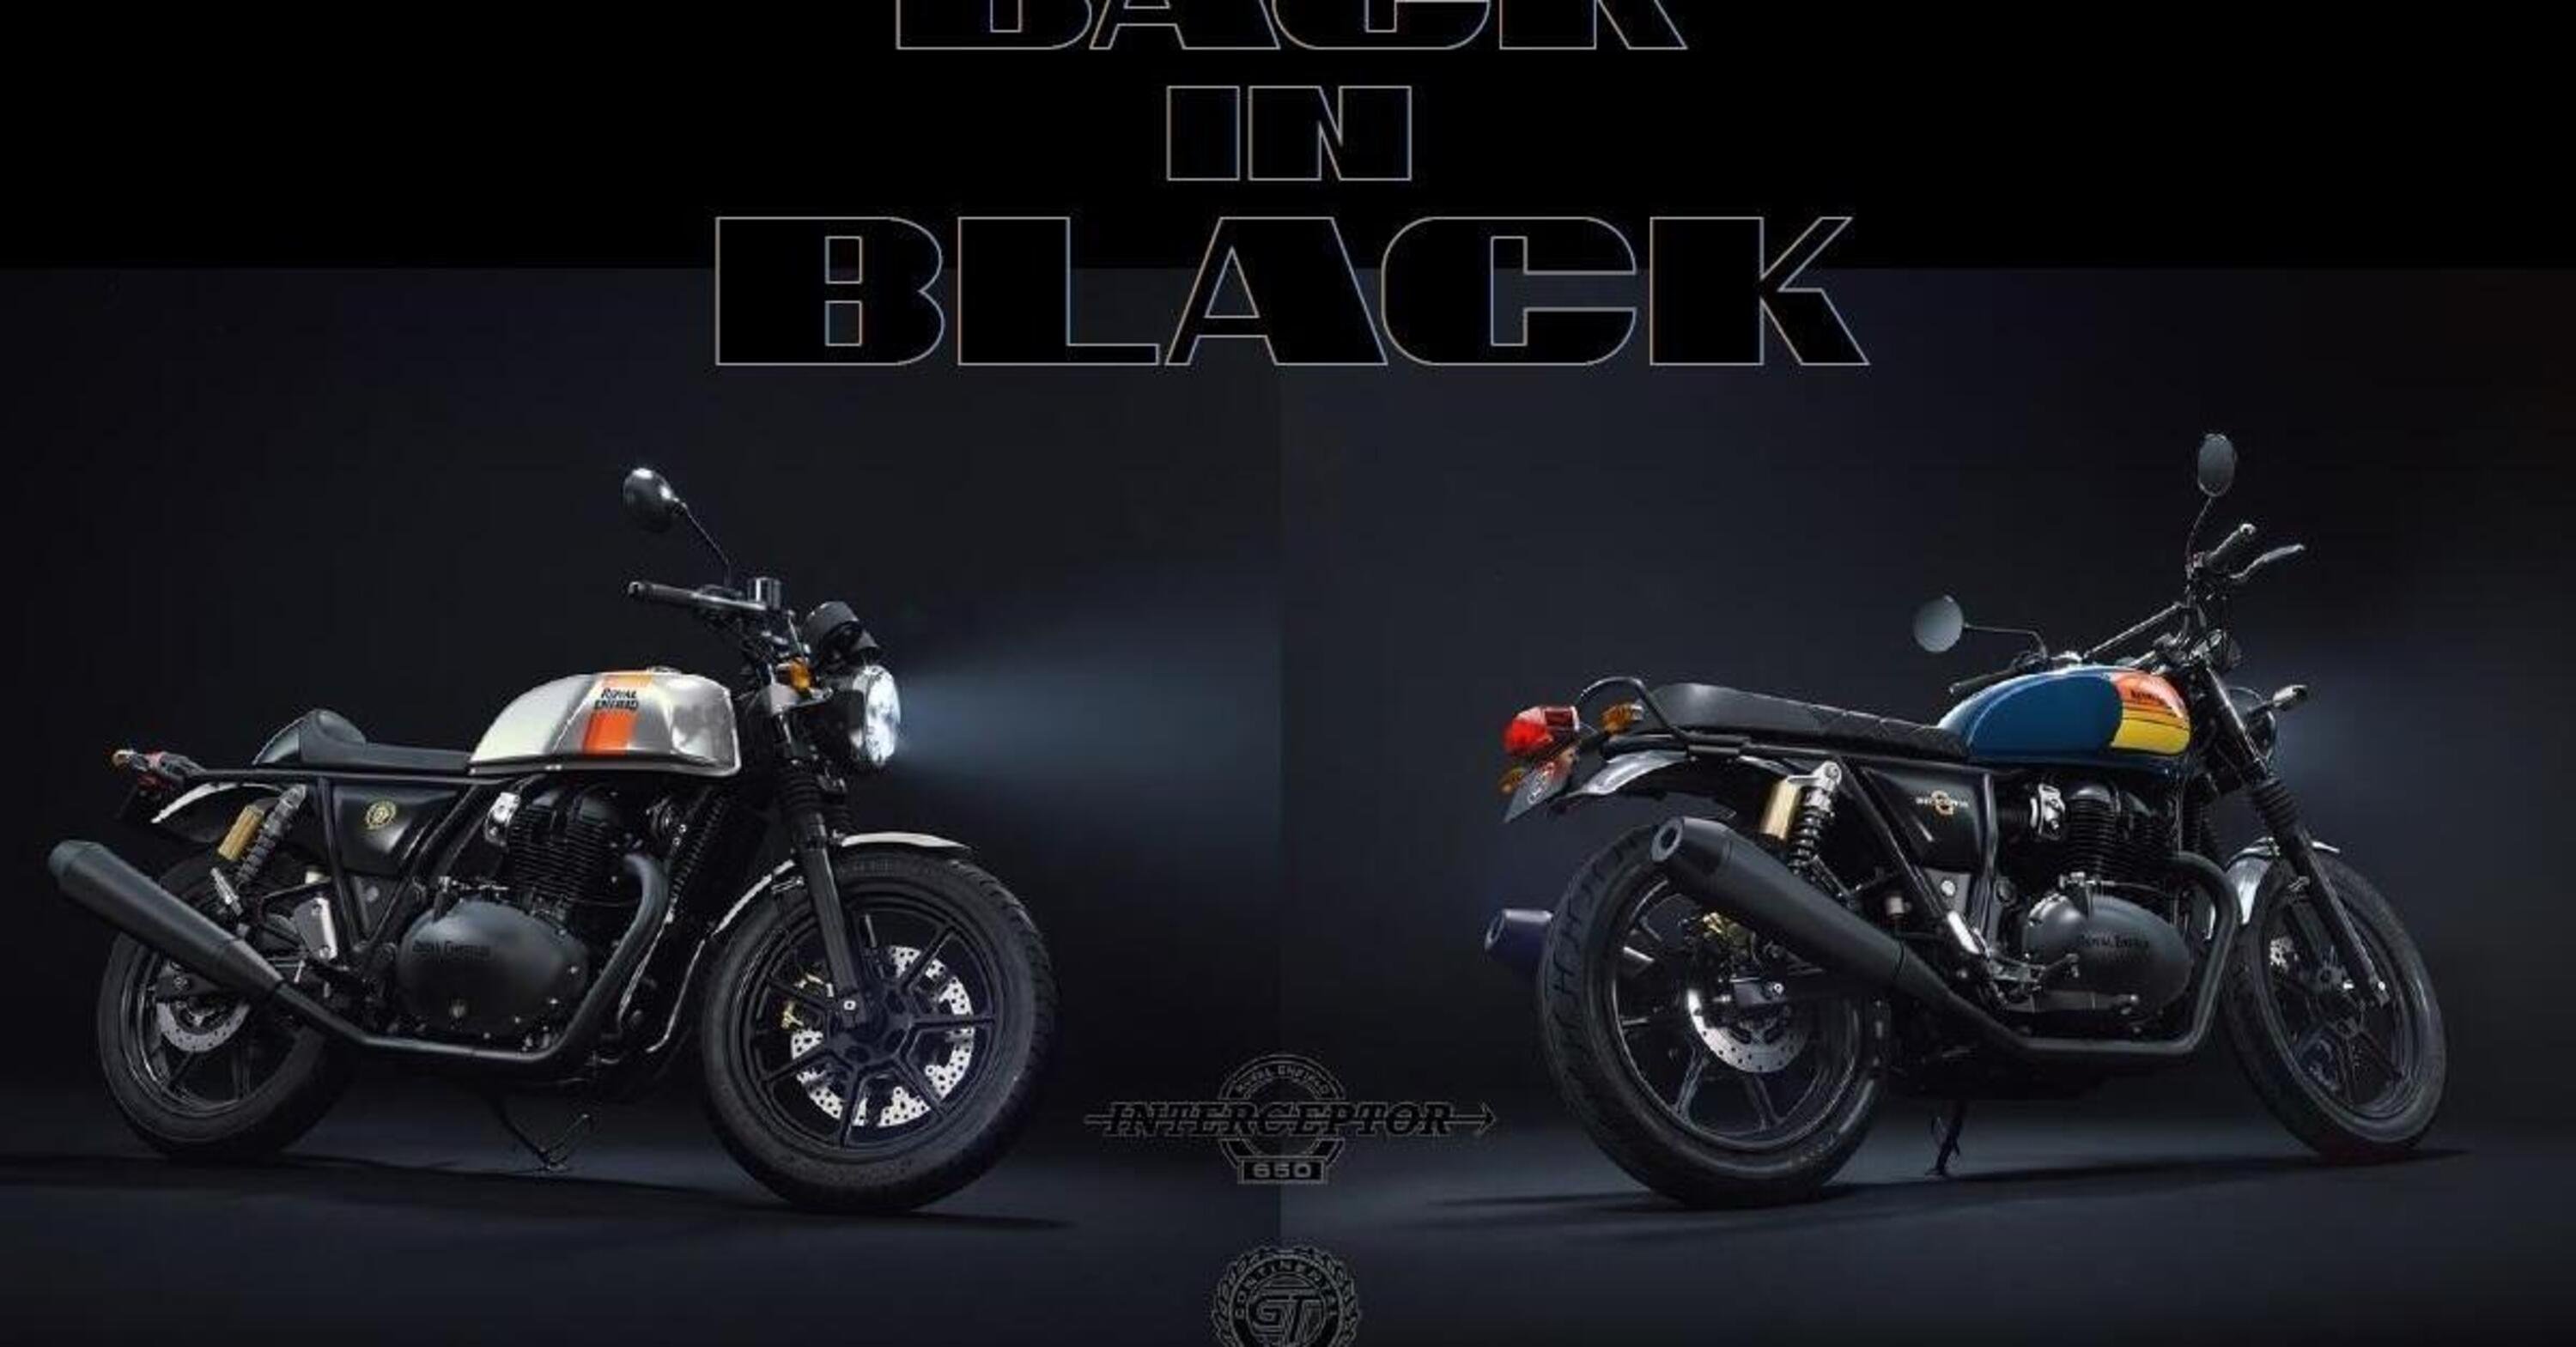 Blackout! Le nuove Royal Enfield Interceptor e Continental GT [GALLERY]